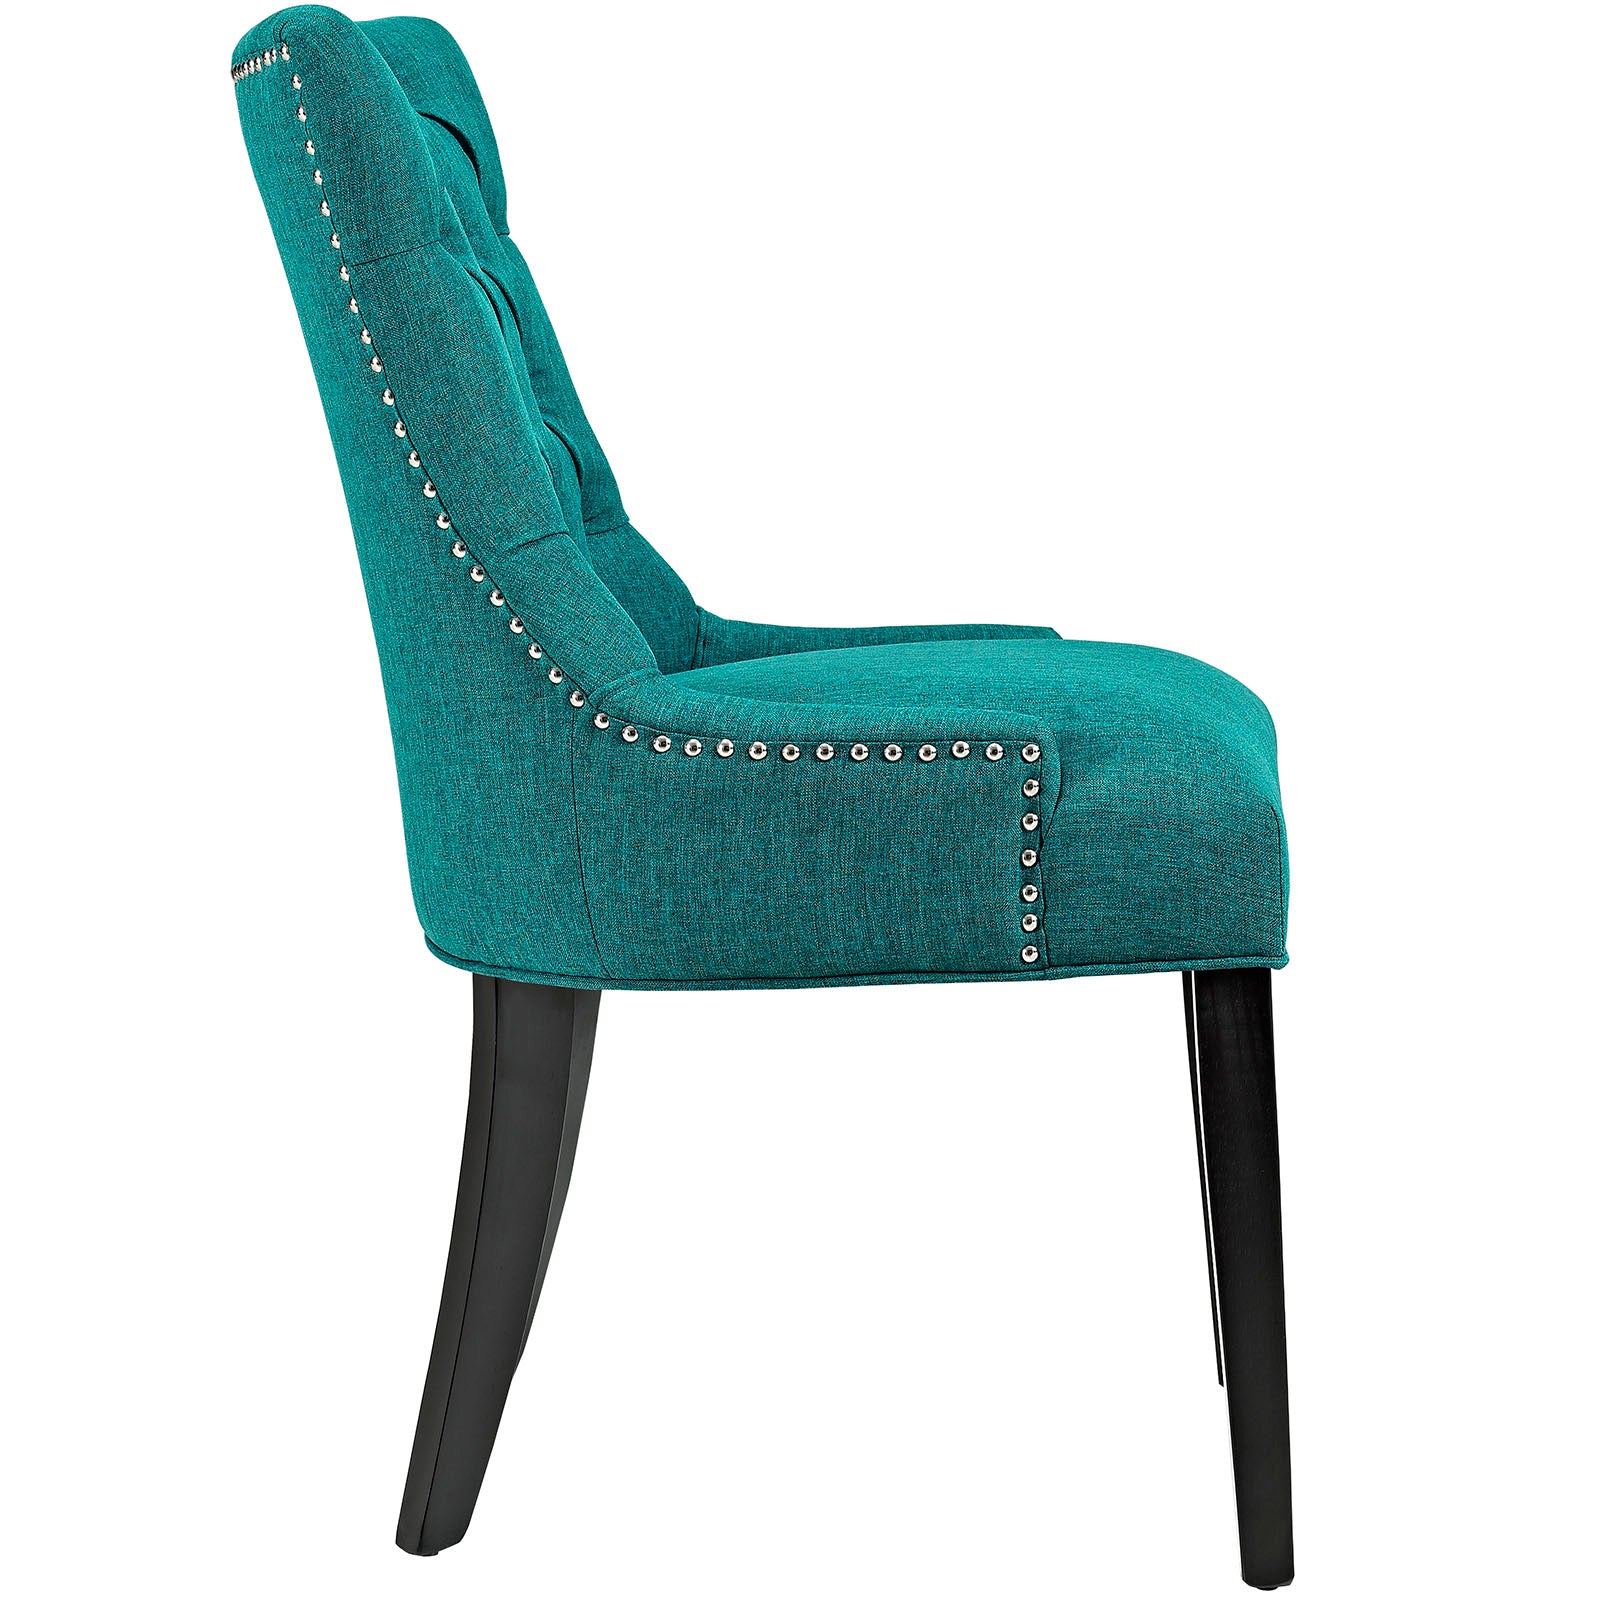 Modway Dining Chairs - Regent Tufted Fabric Dining Side Chair Teal